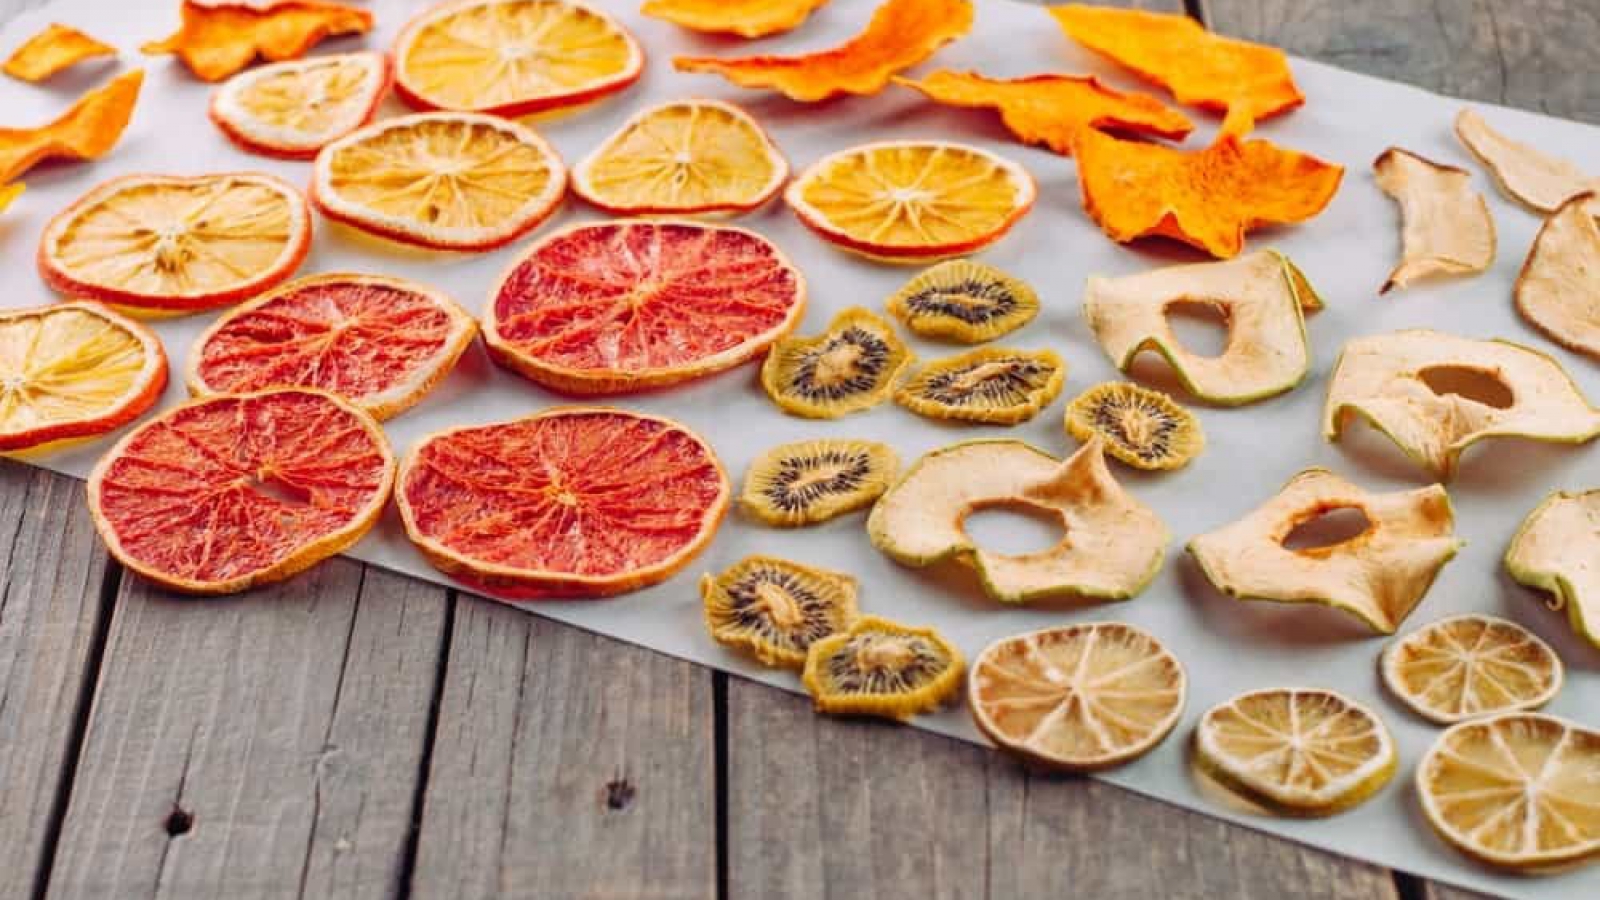 dehydrated fruits and vegetables